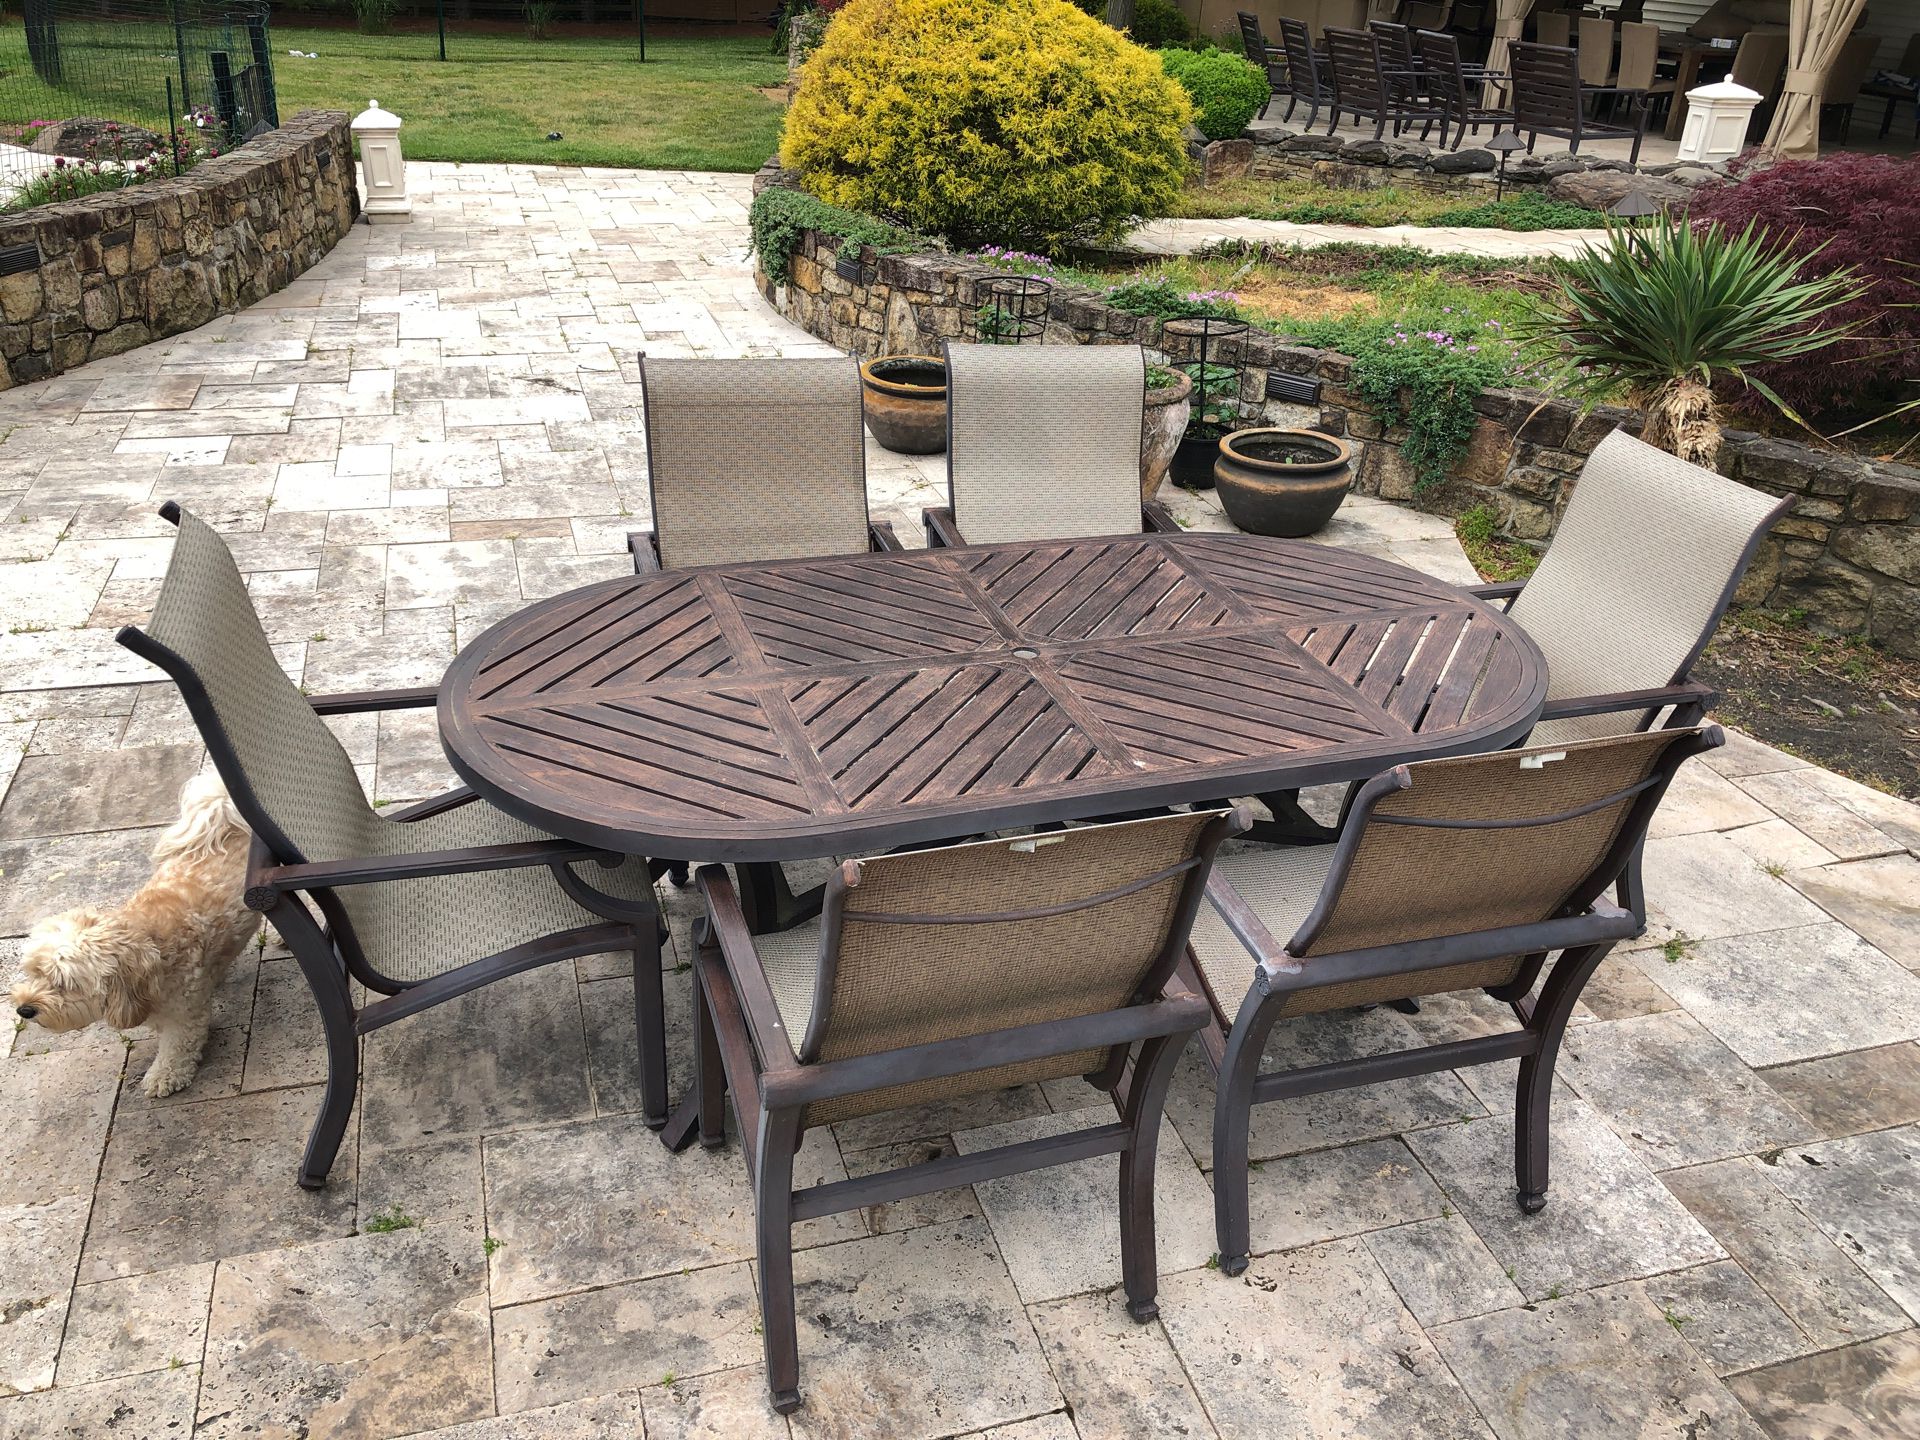 High end Powder coated metal dining room table with six arm chairs outdoors